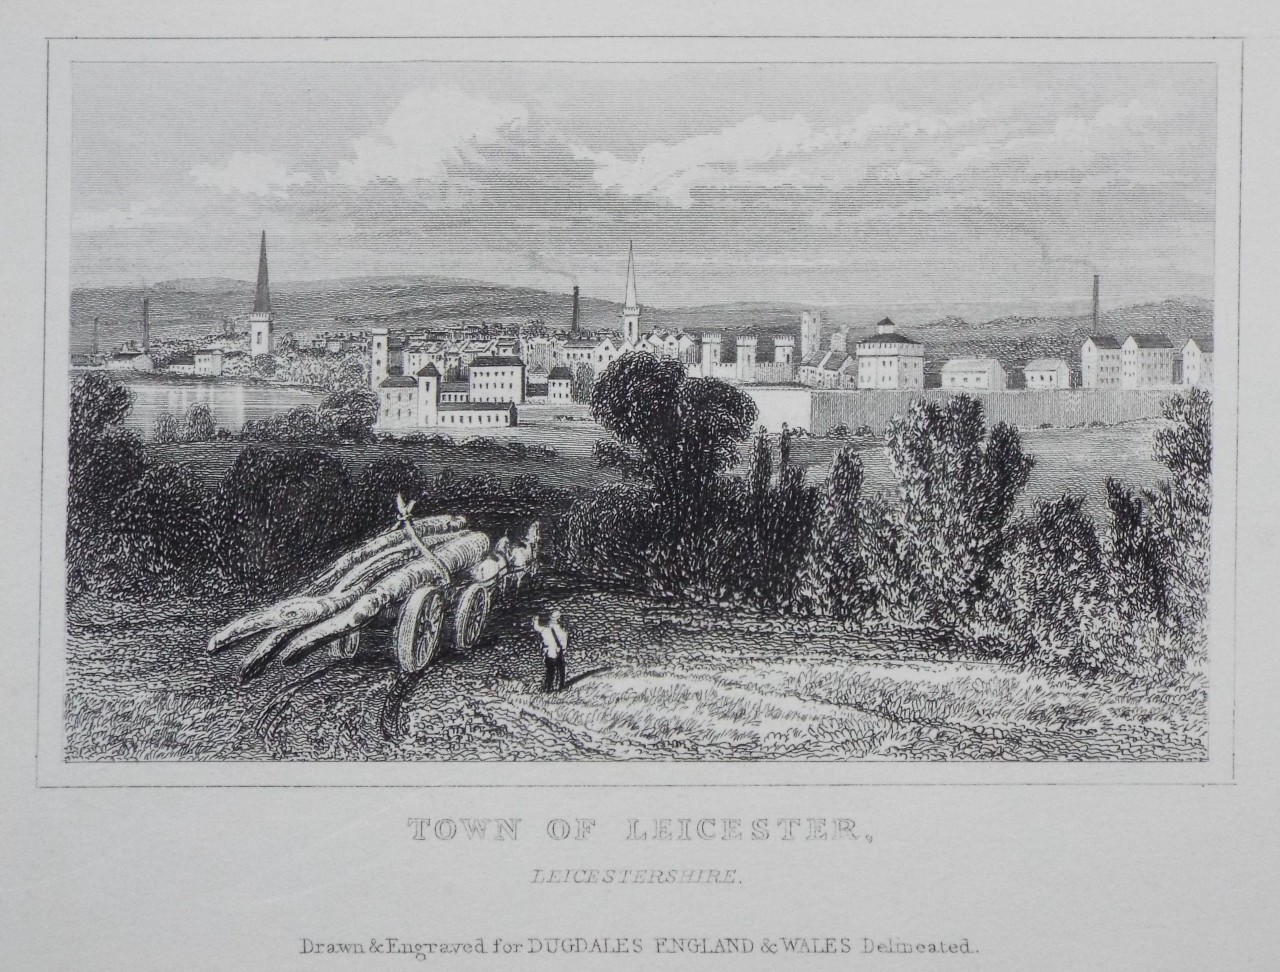 Print - Town of Leicester, Leicestershire.